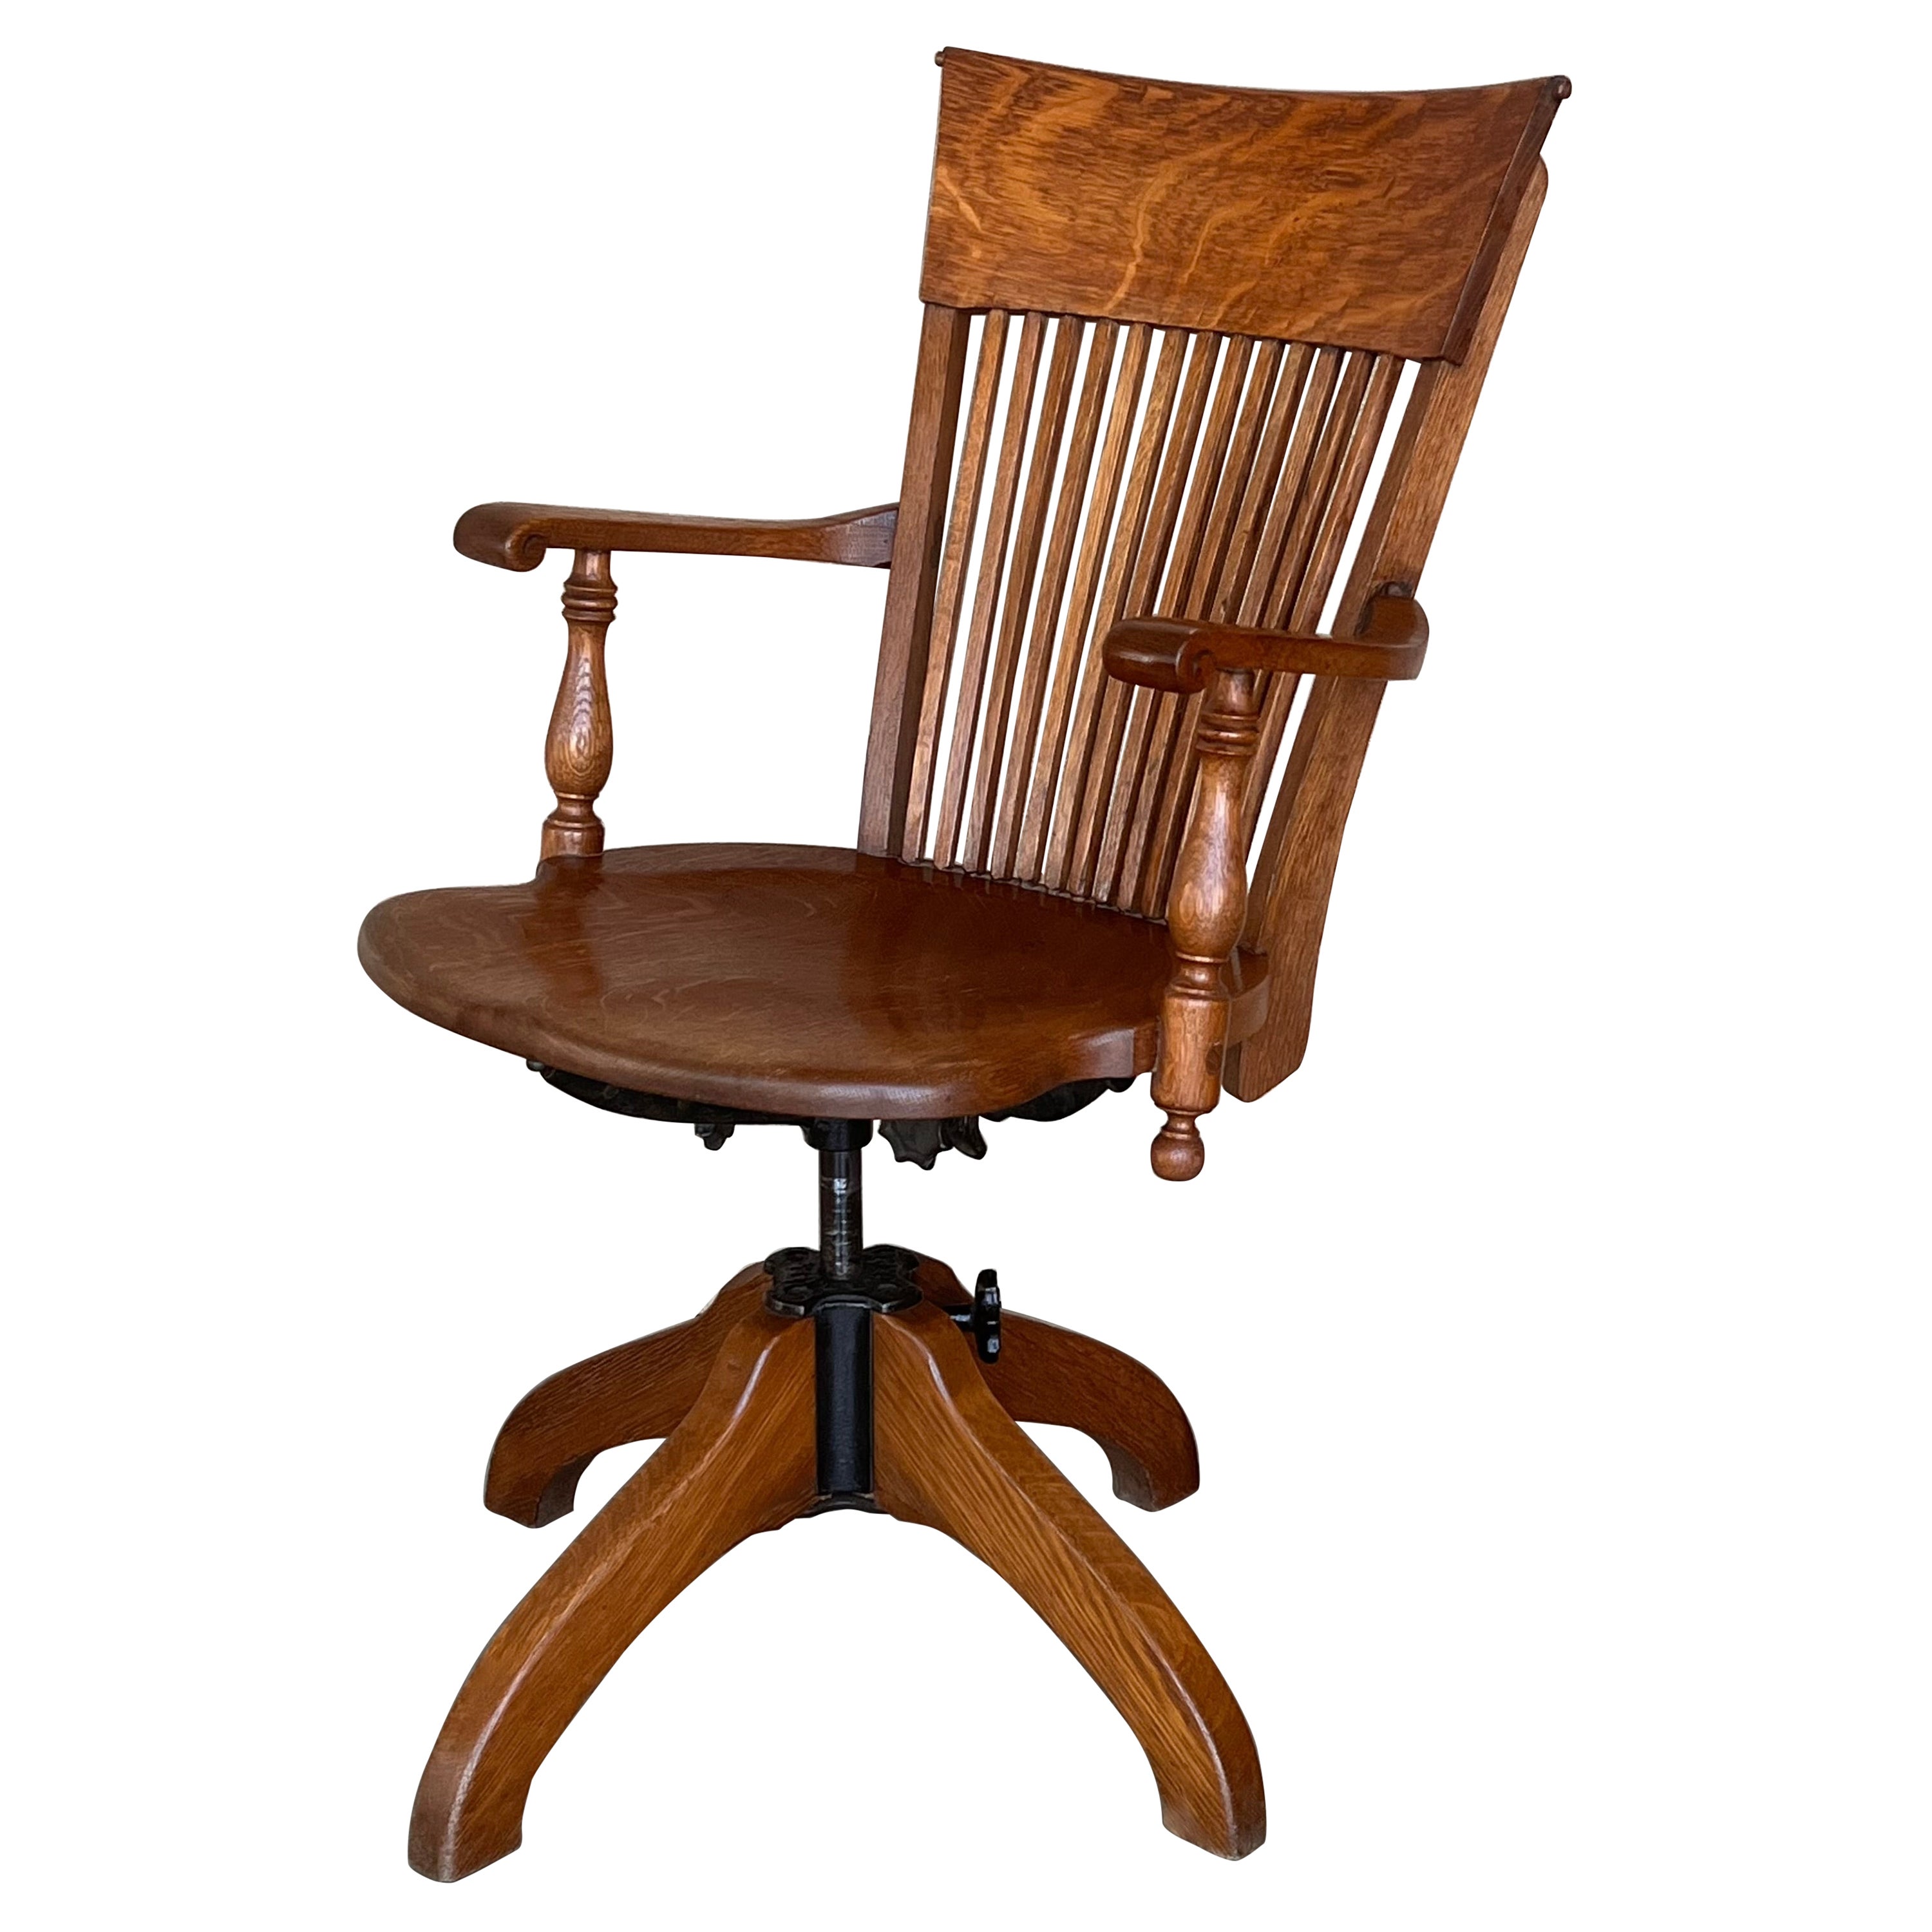 Modernist Wood Swivel Chair from Barcelona, circa 1940 For Sale at 1stDibs